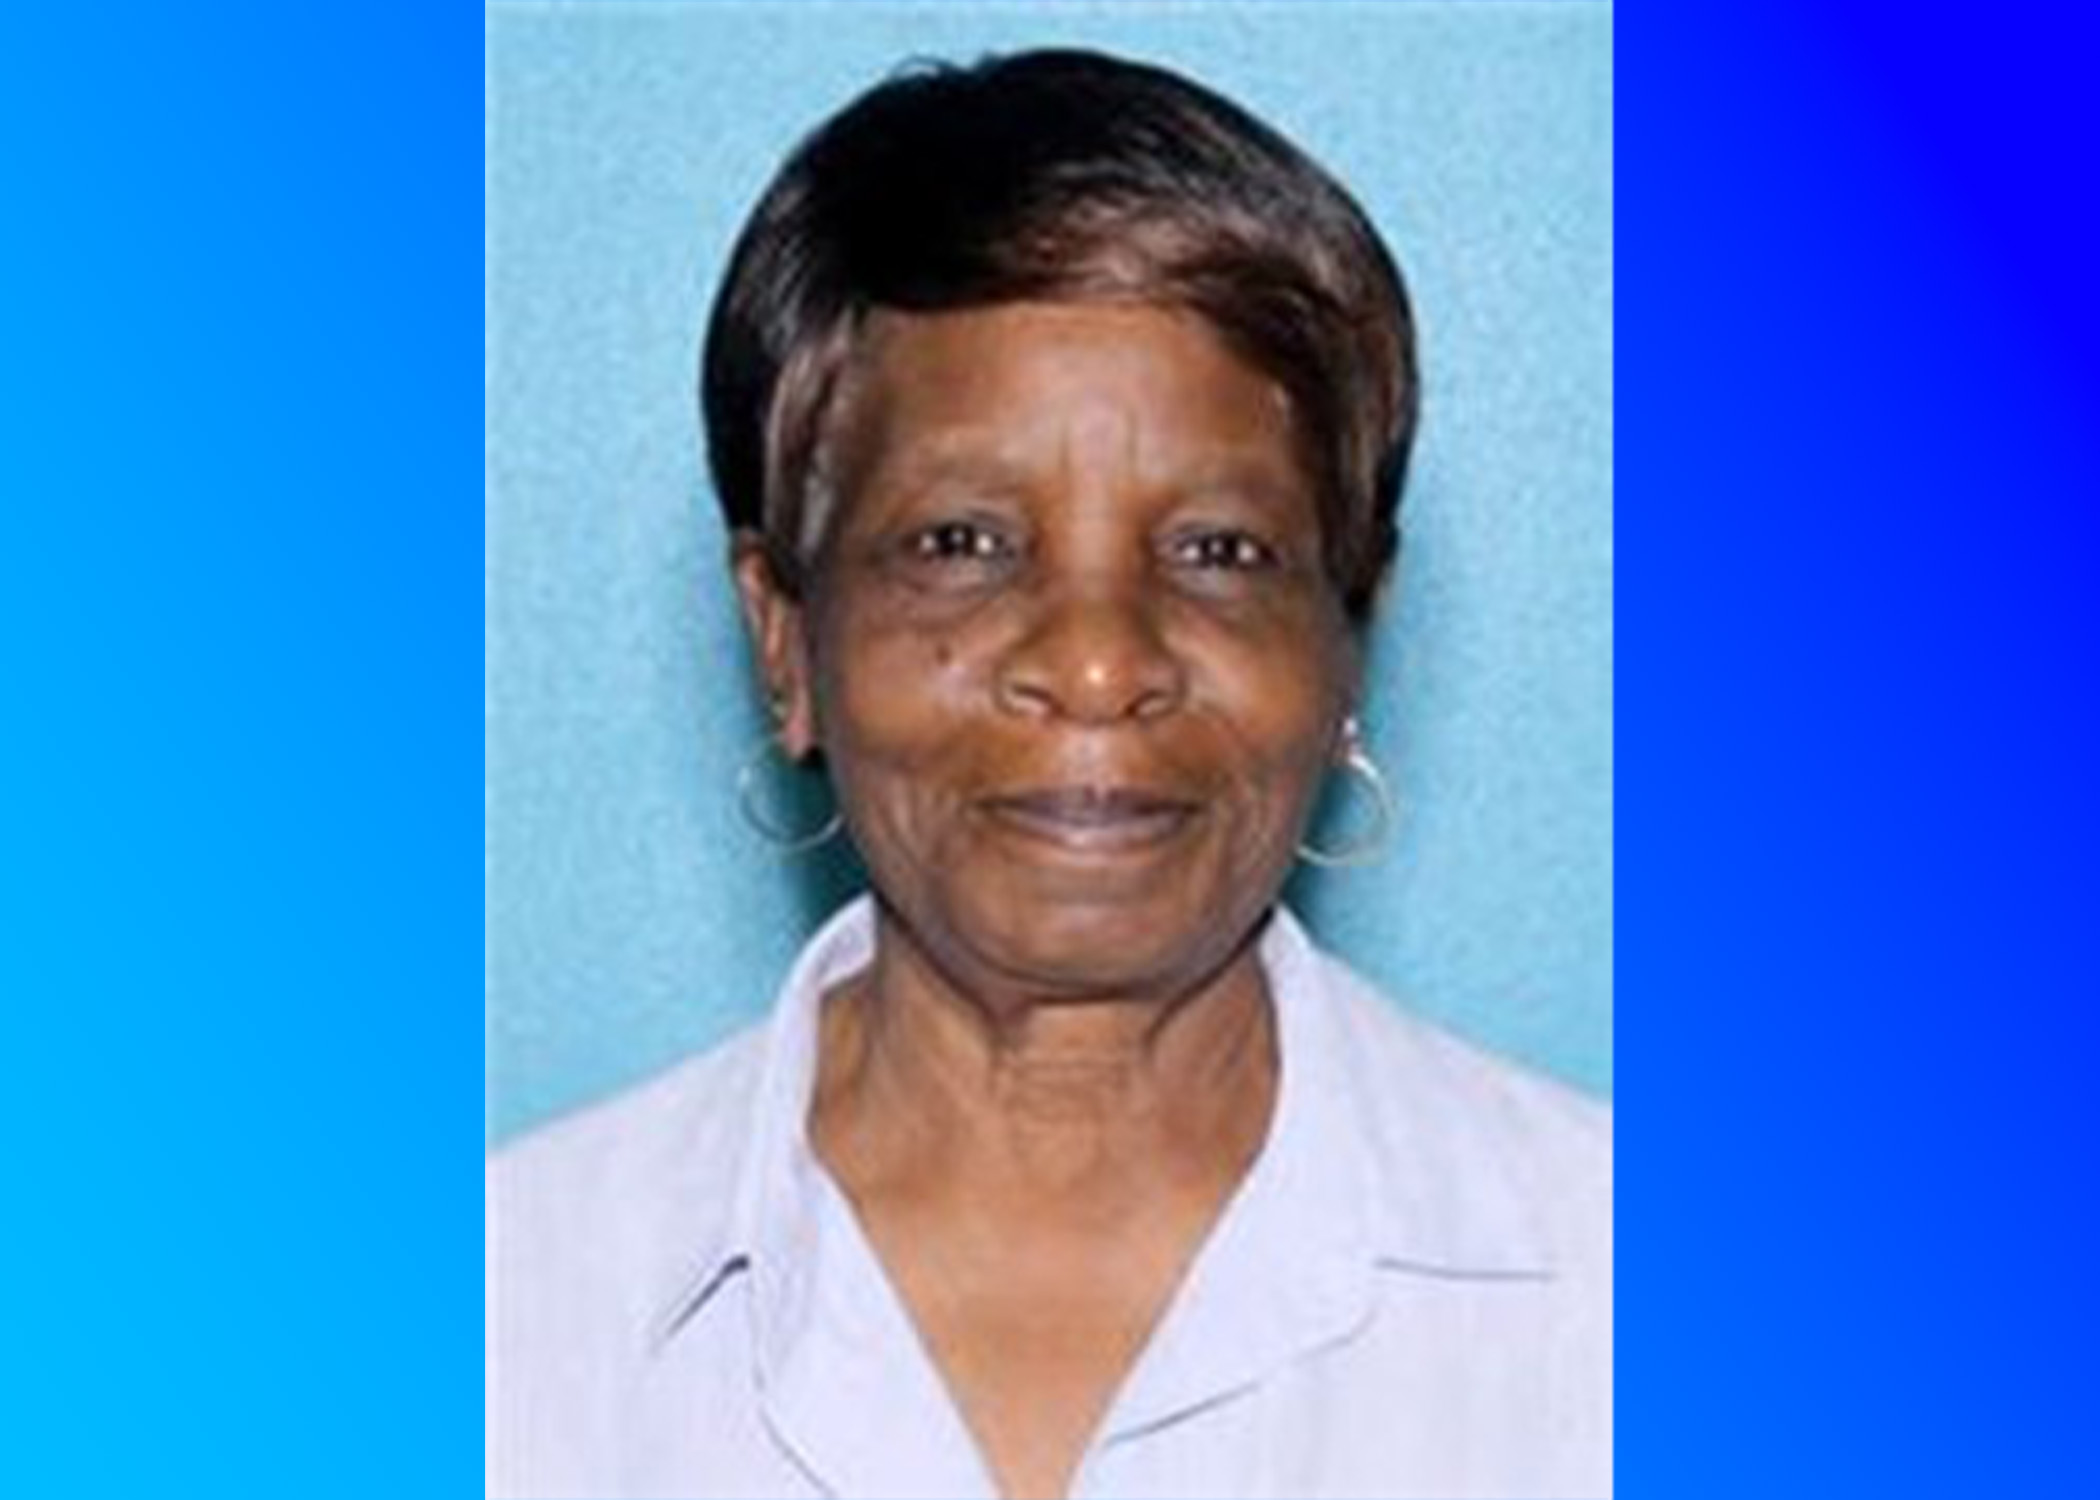 UPDATE: Missing 76-year-old woman found safe